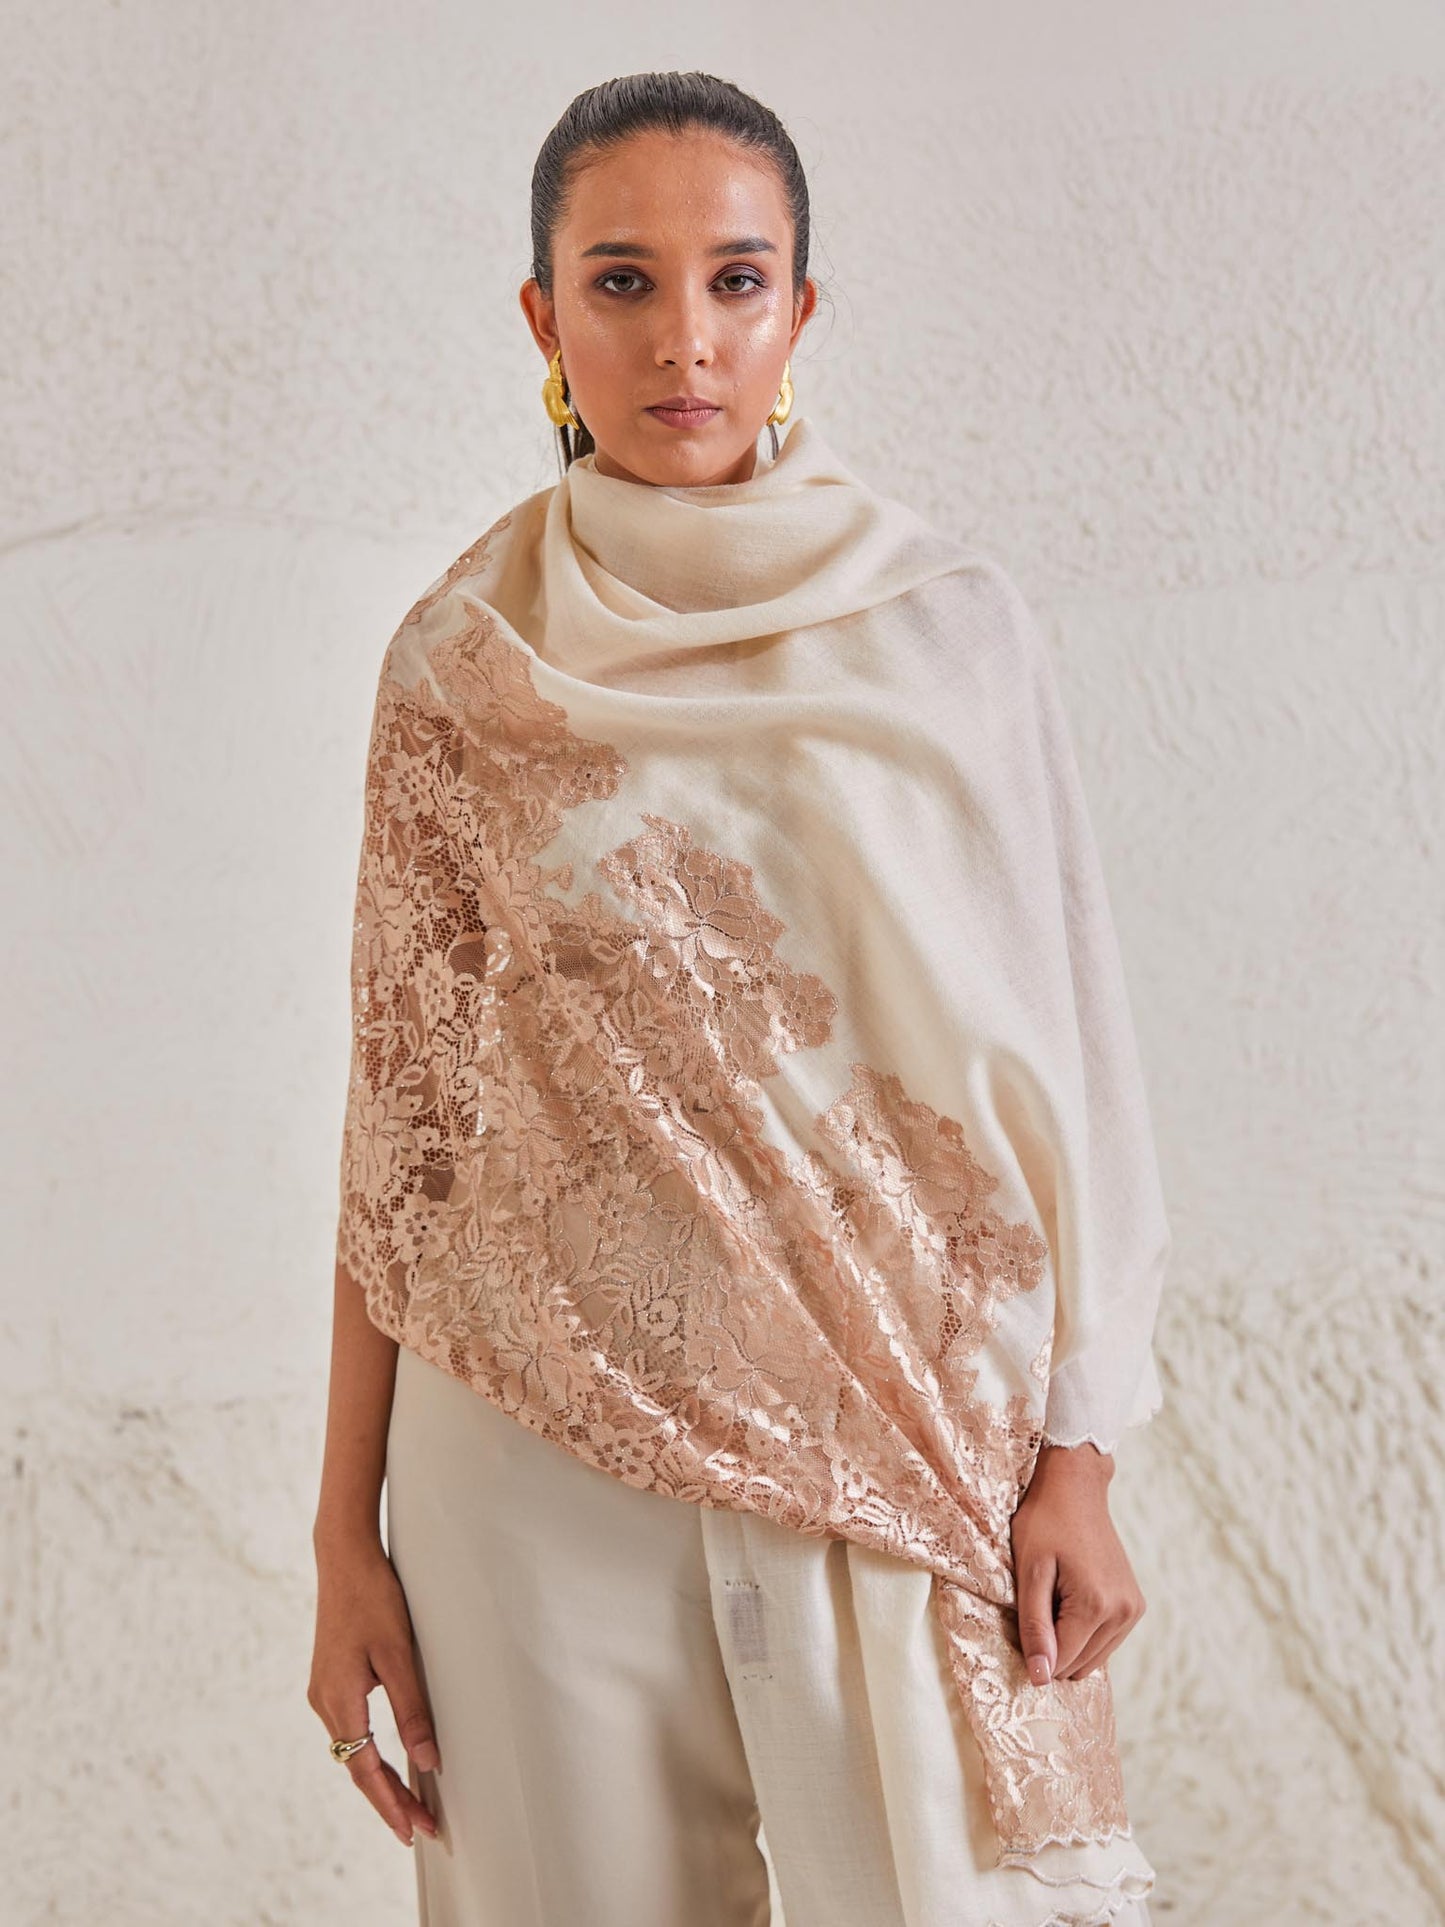 Model is wearing the Celestial Chantilly Pashmina Shawl in white and rose gold.